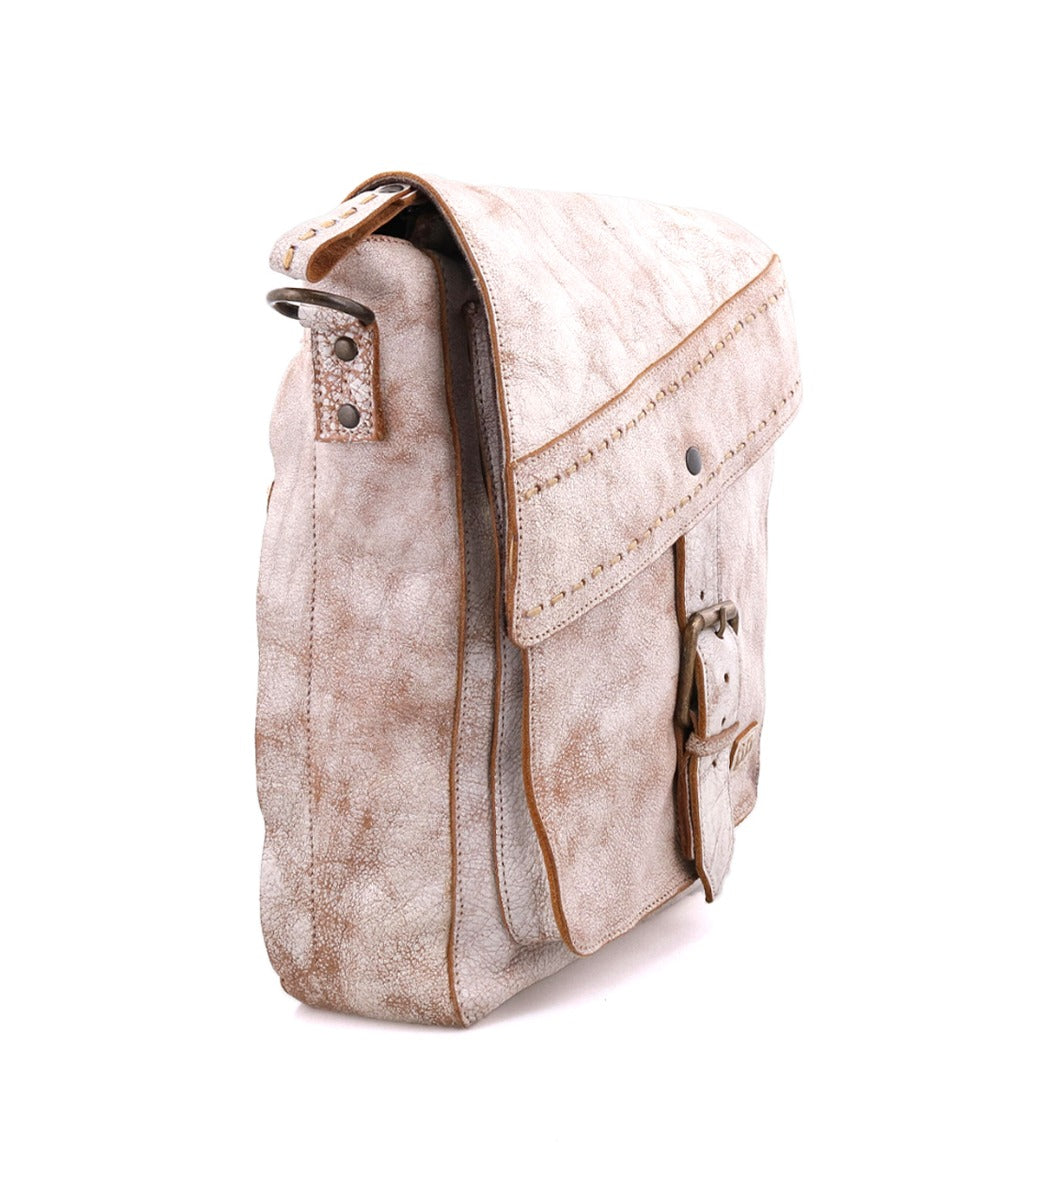 A worn, beige leather Ainhoa LTC crossbody handbag by Bed Stu with an adjustable strap and buckle closures, standing against a white background.